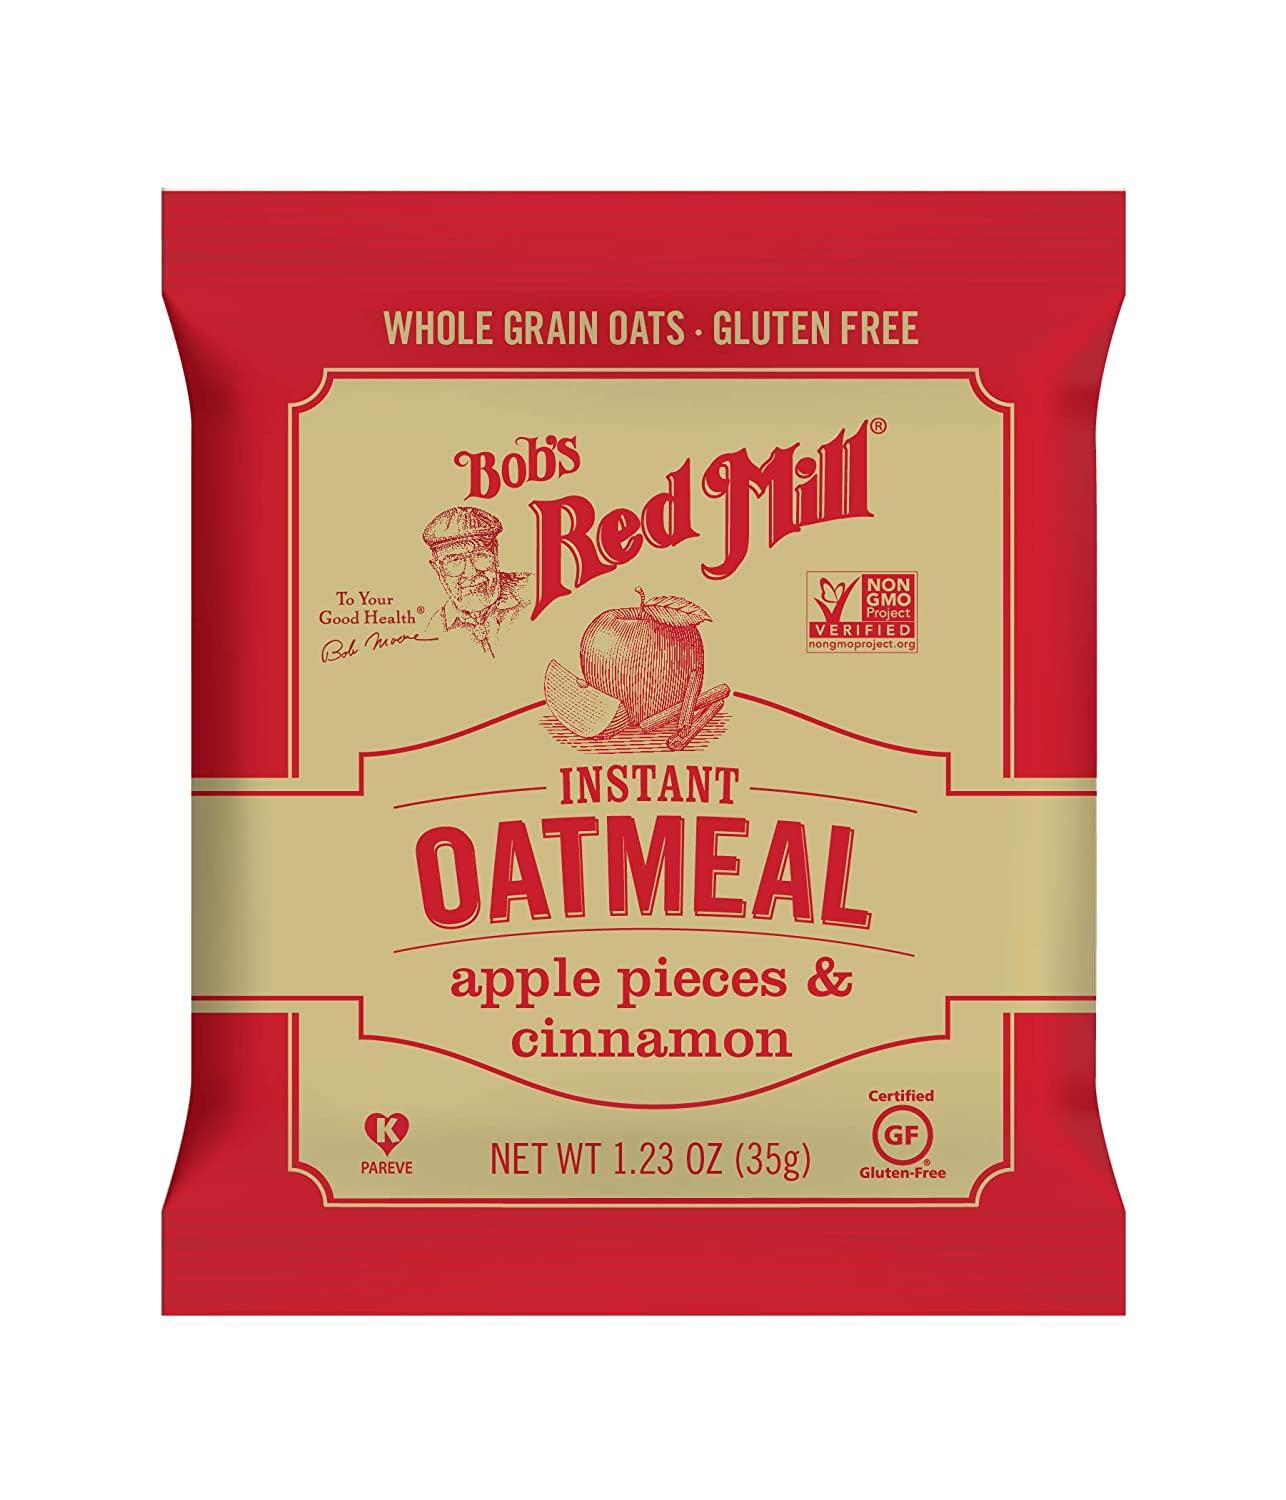  Bob's Red Mill Instant Oatmeal Packets Apple Pieces